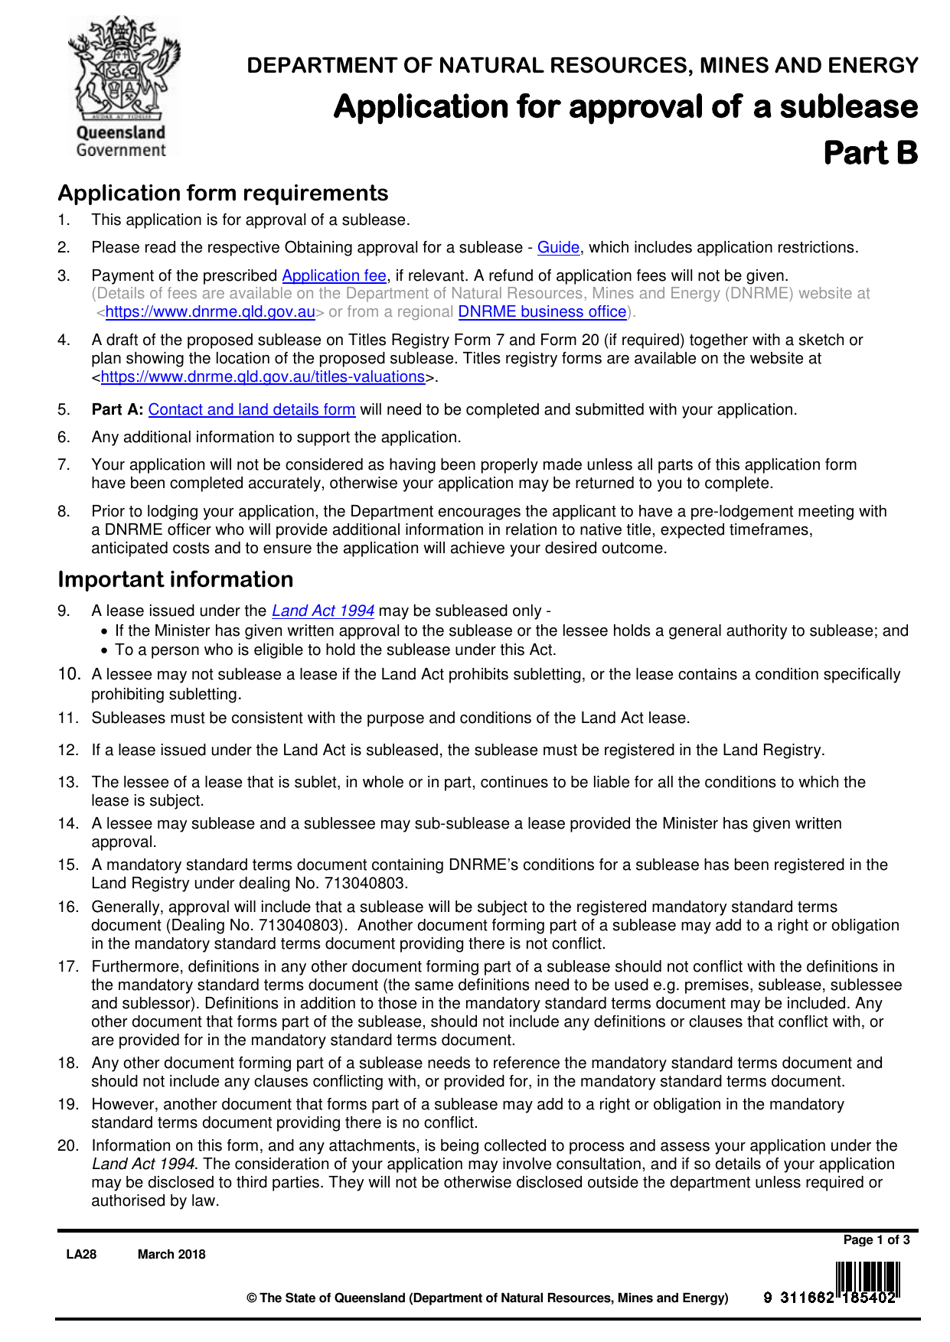 Form LA28 Part B Application for Approval of a Sublease - Queensland, Australia, Page 1